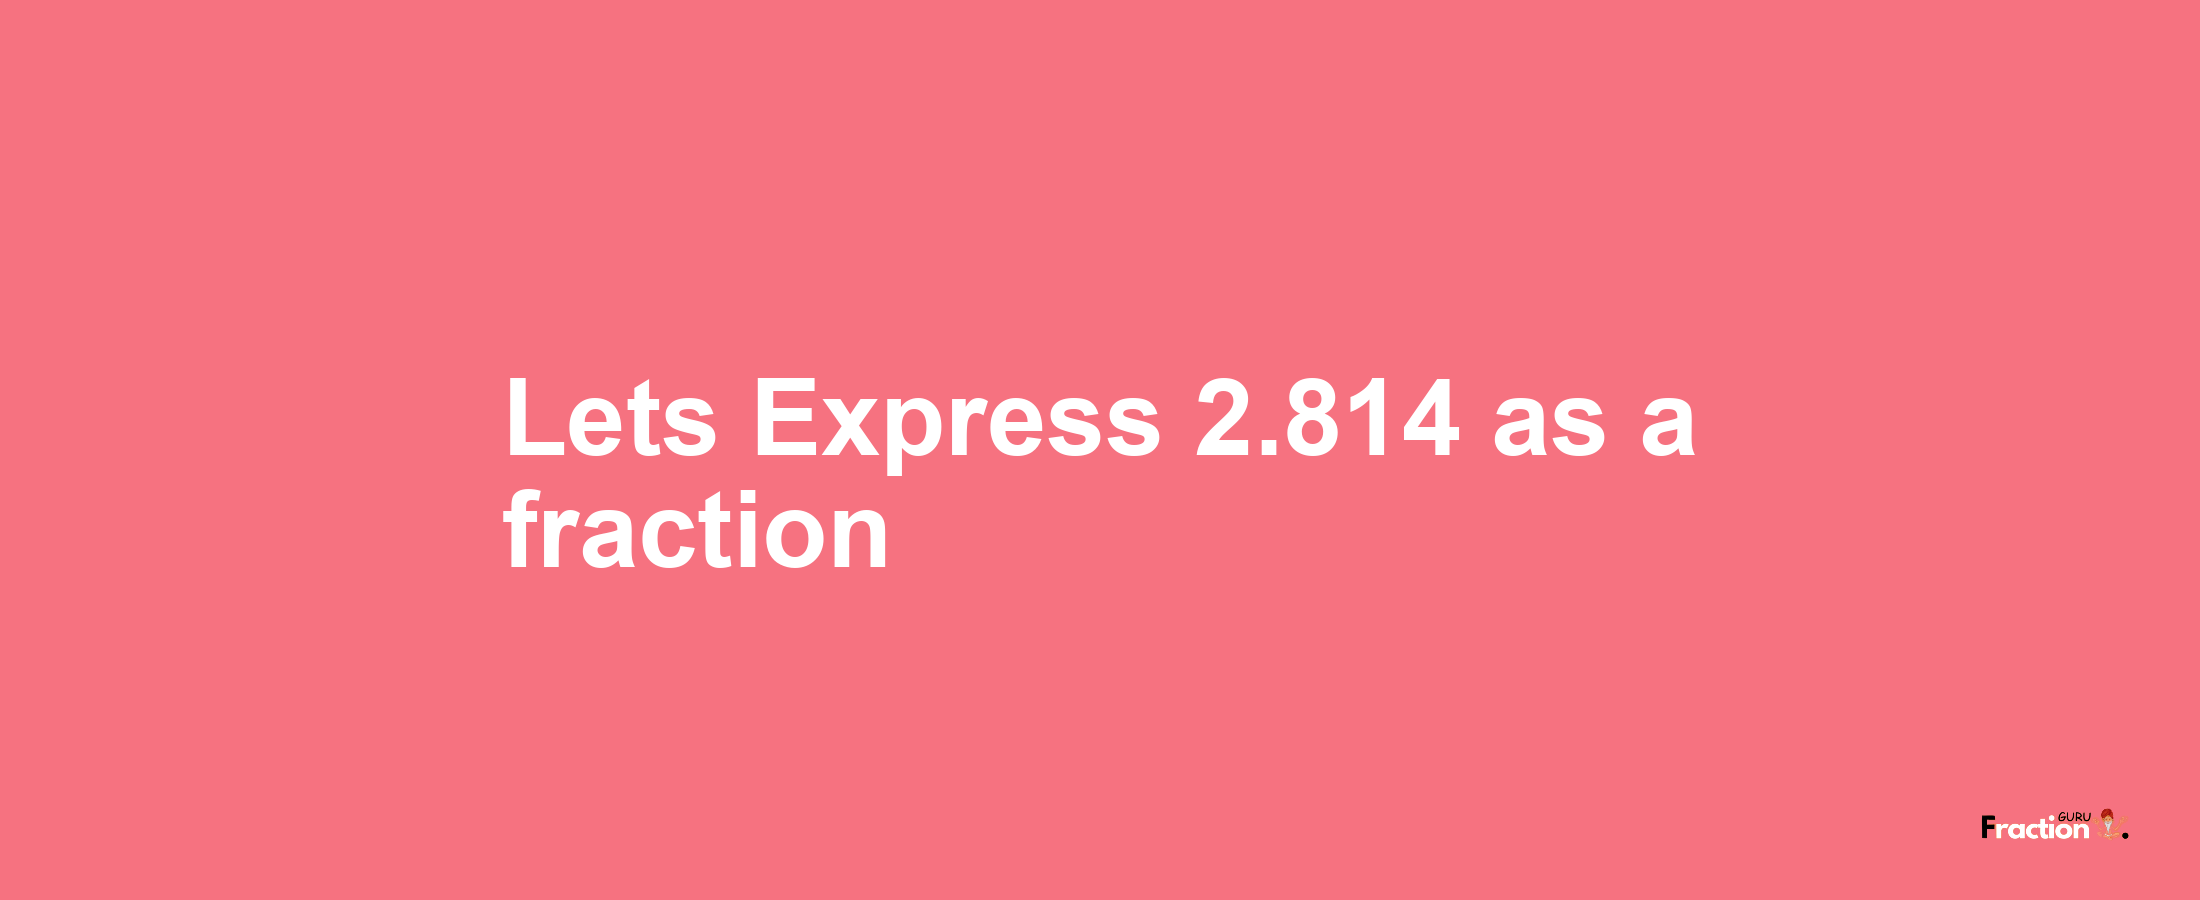 Lets Express 2.814 as afraction